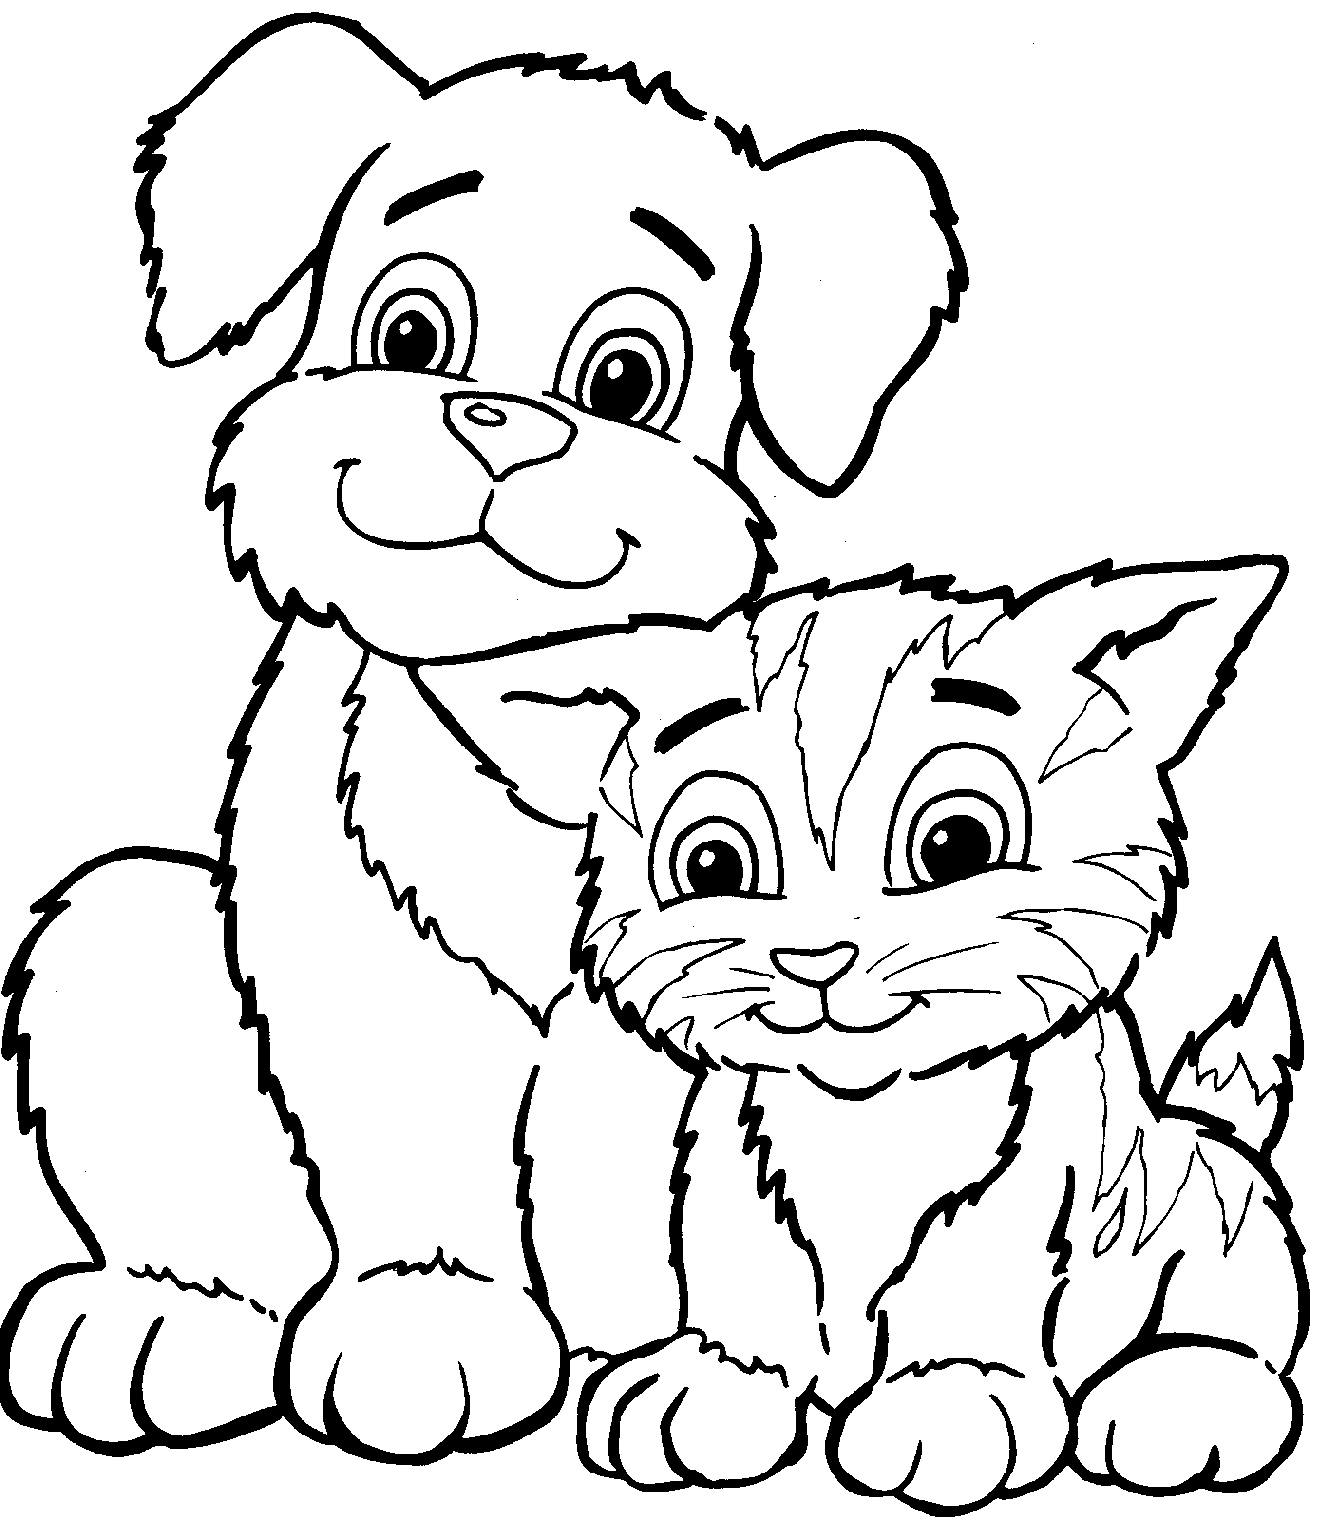 black and white dog and cat pictures